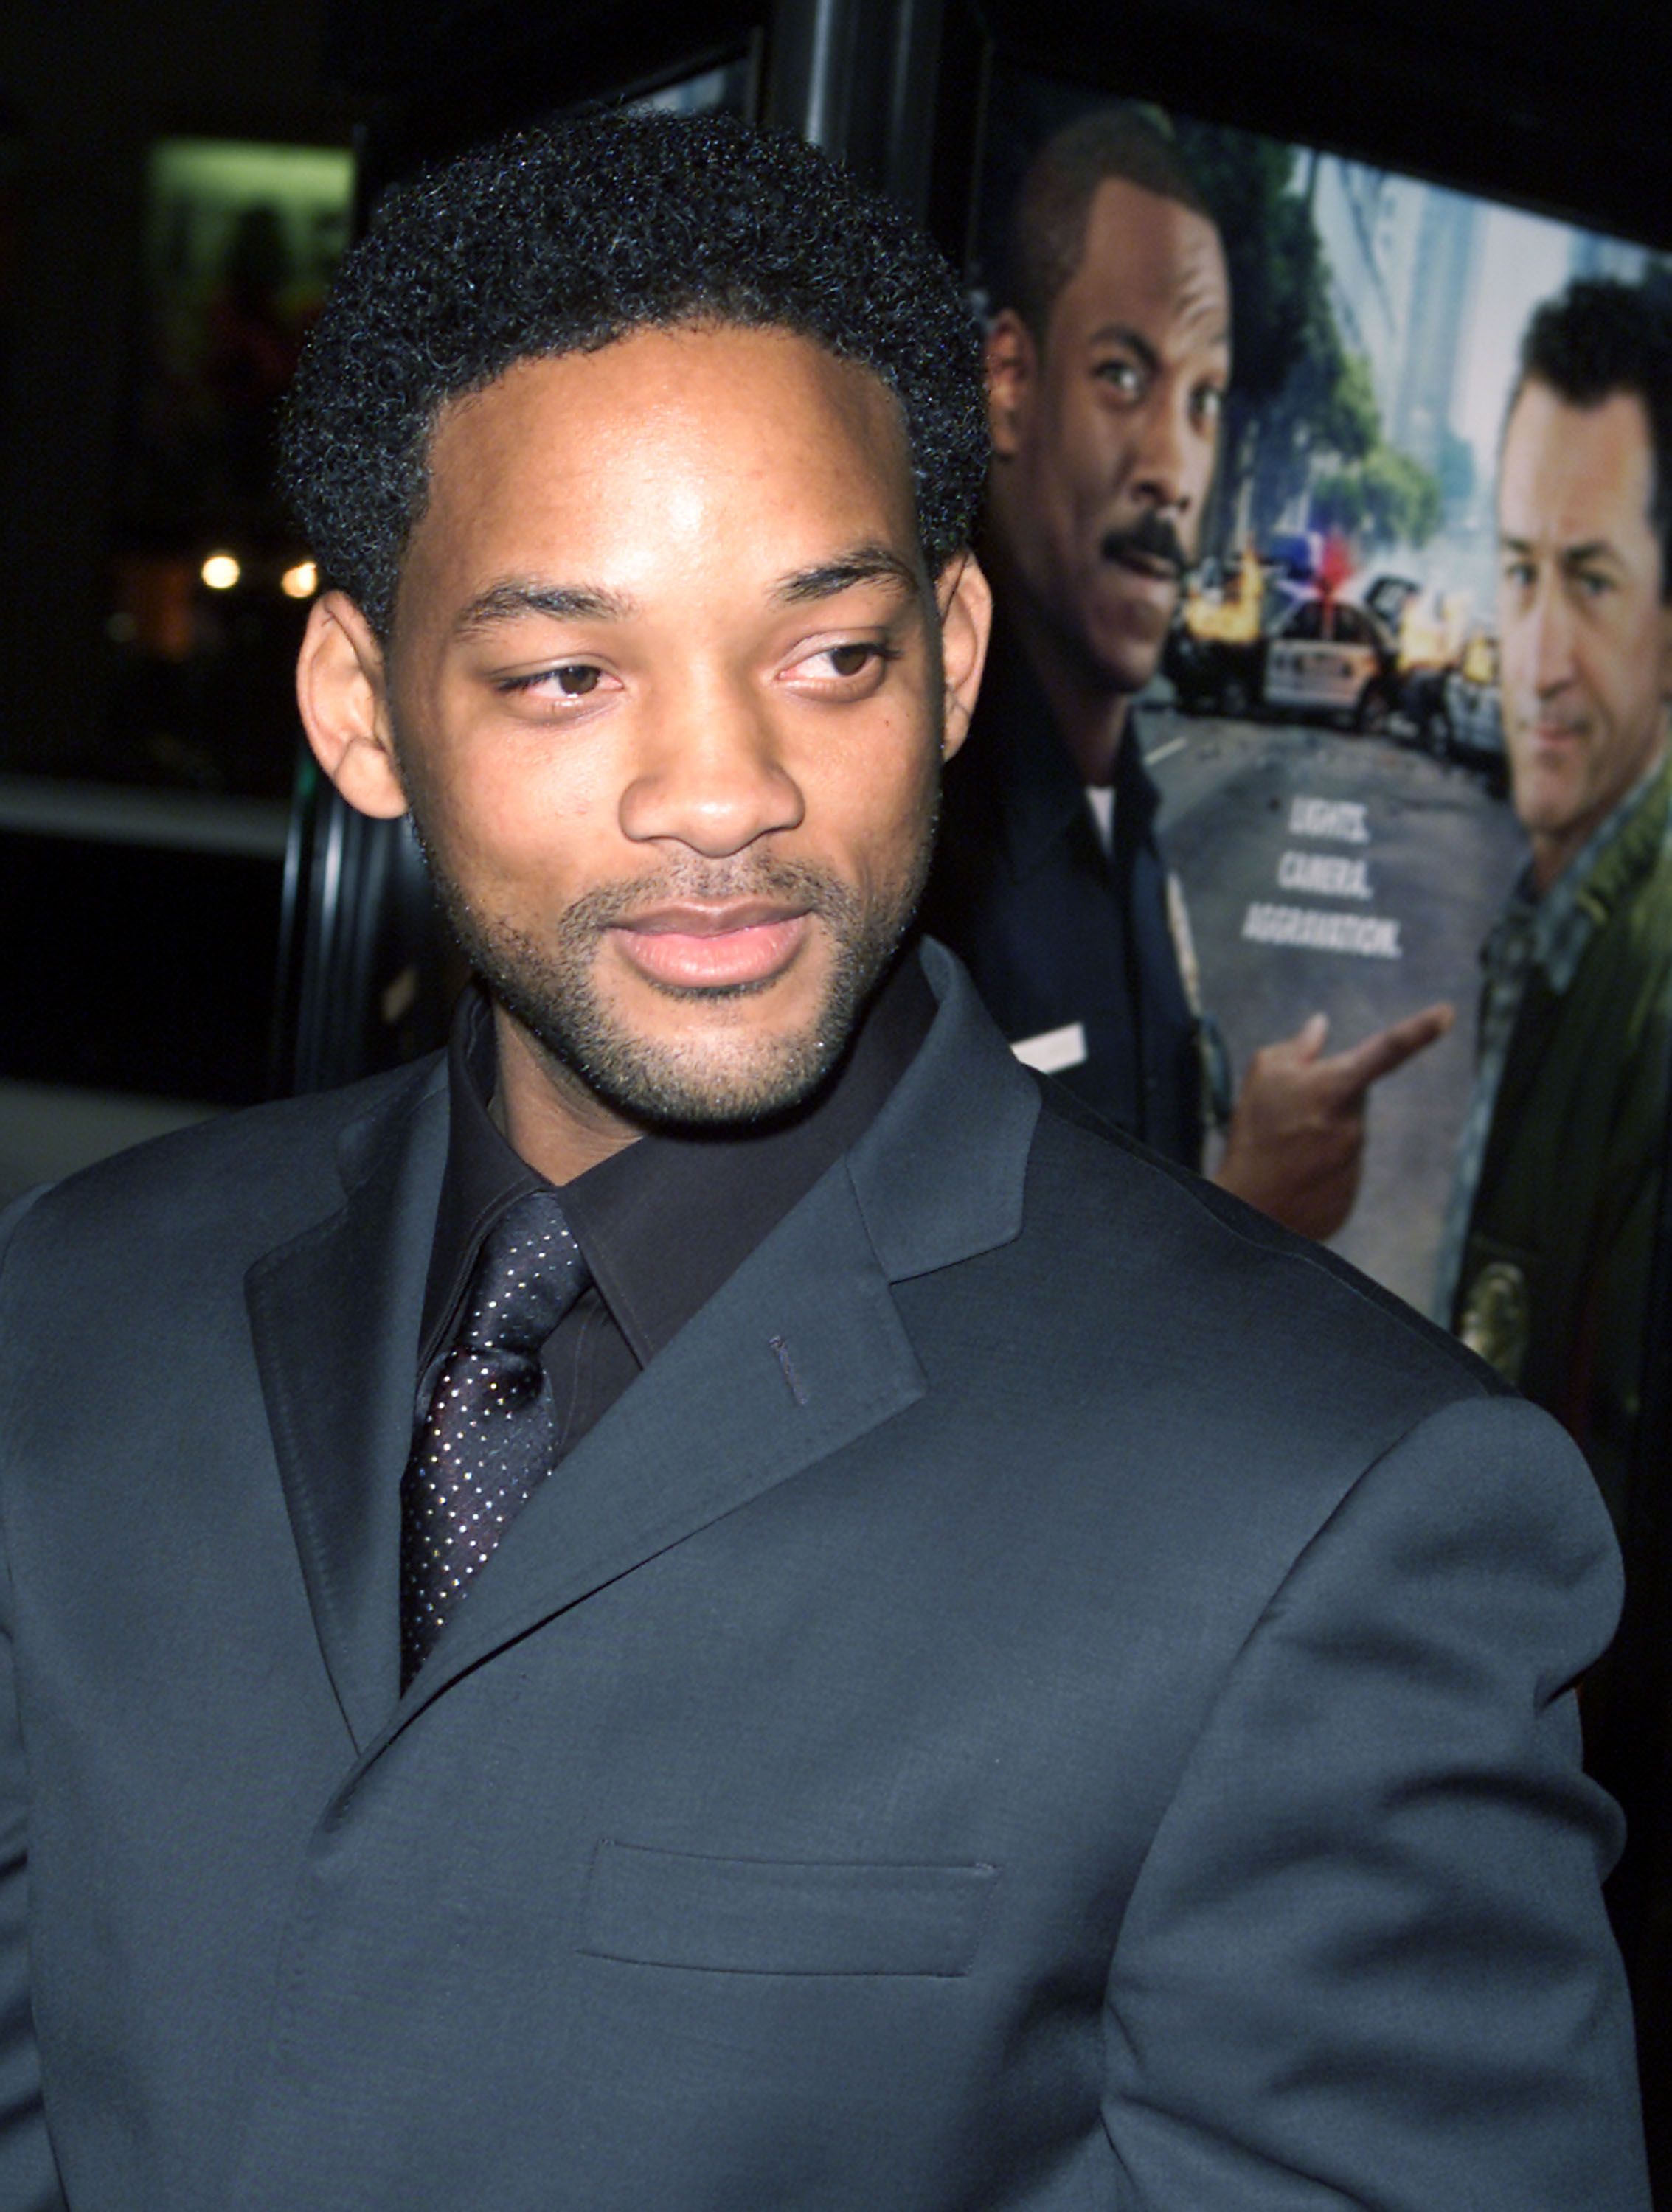 Will Smith attending the premiere of "Showtime” in L.A on Monday, March 11, 2002. | Photo: Getty Images